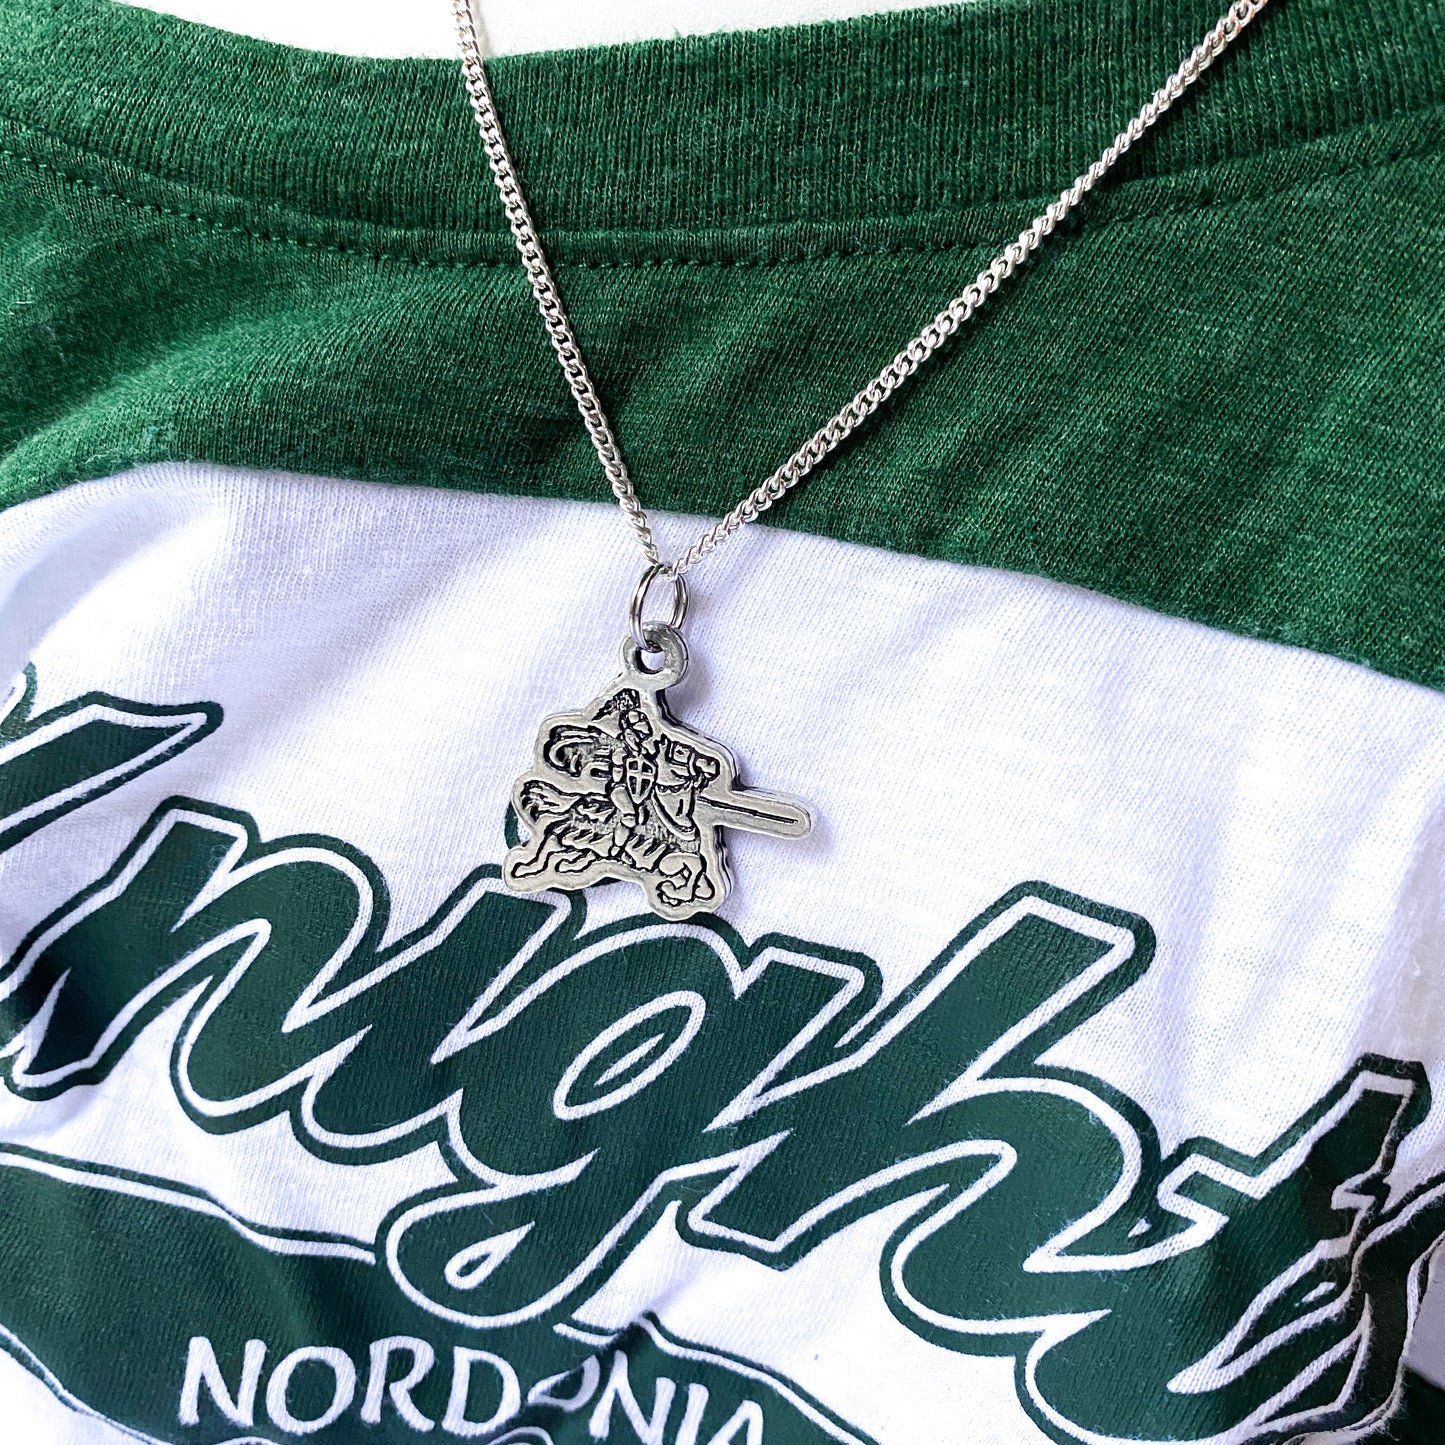 Nordonia Knight on Horse Necklace